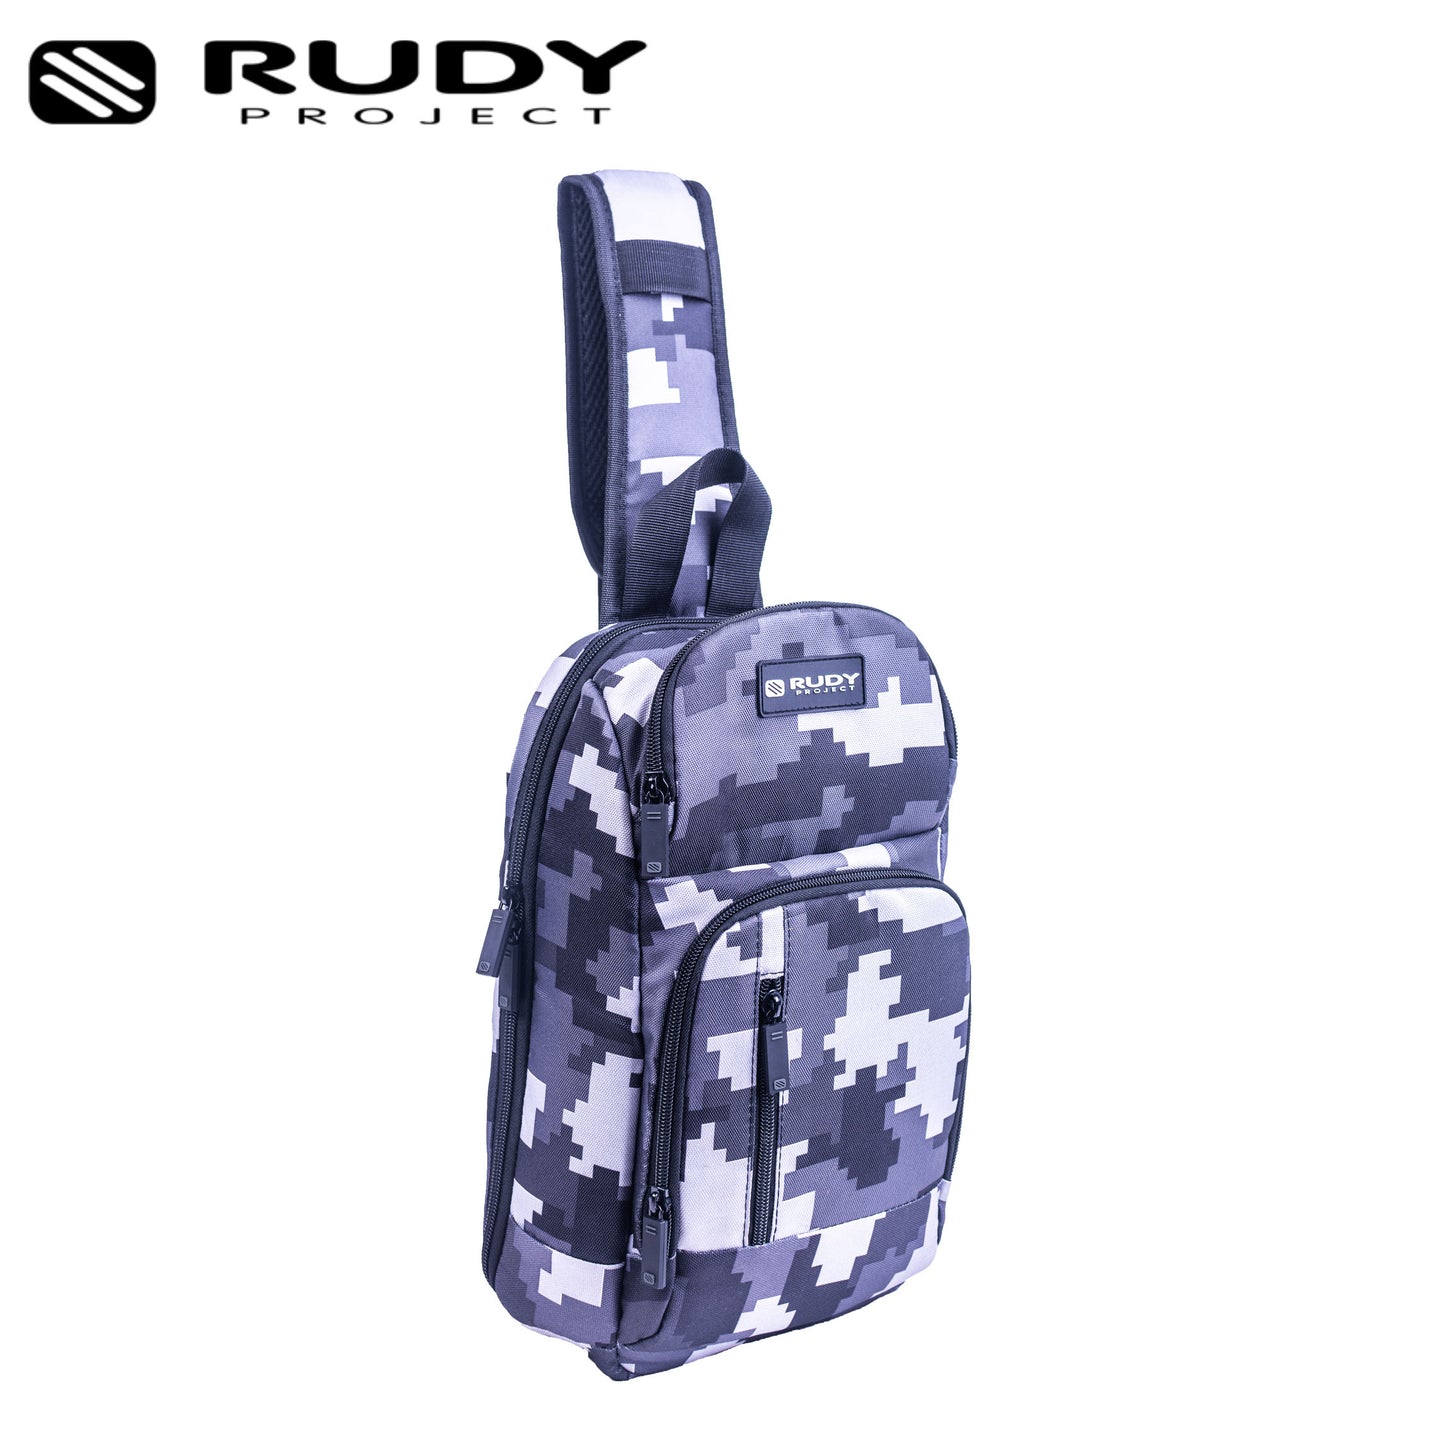 Rudy Project Forio Body Bag in Camouflage